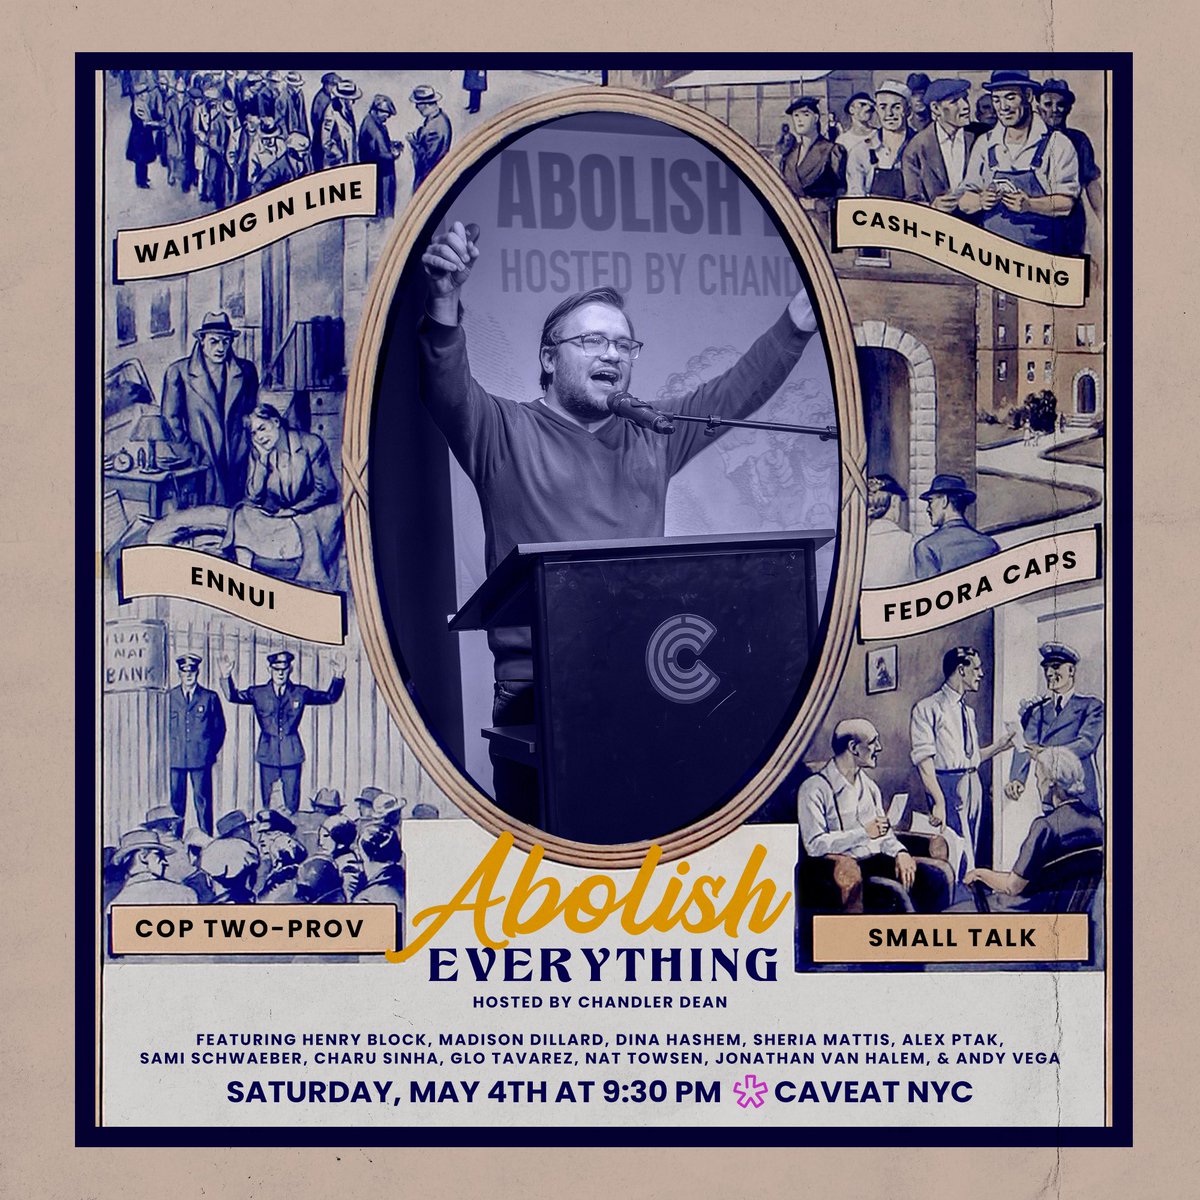 SATURDAY, MAY 4th! Abolish Everything is BACK @caveatnyc! Come see comedians roast their pet peeves and a panel of improvisers defend the status quo. And get your early bird tix before they expire on 4/27! Don’t miss it: caveat.nyc/events/abolish…